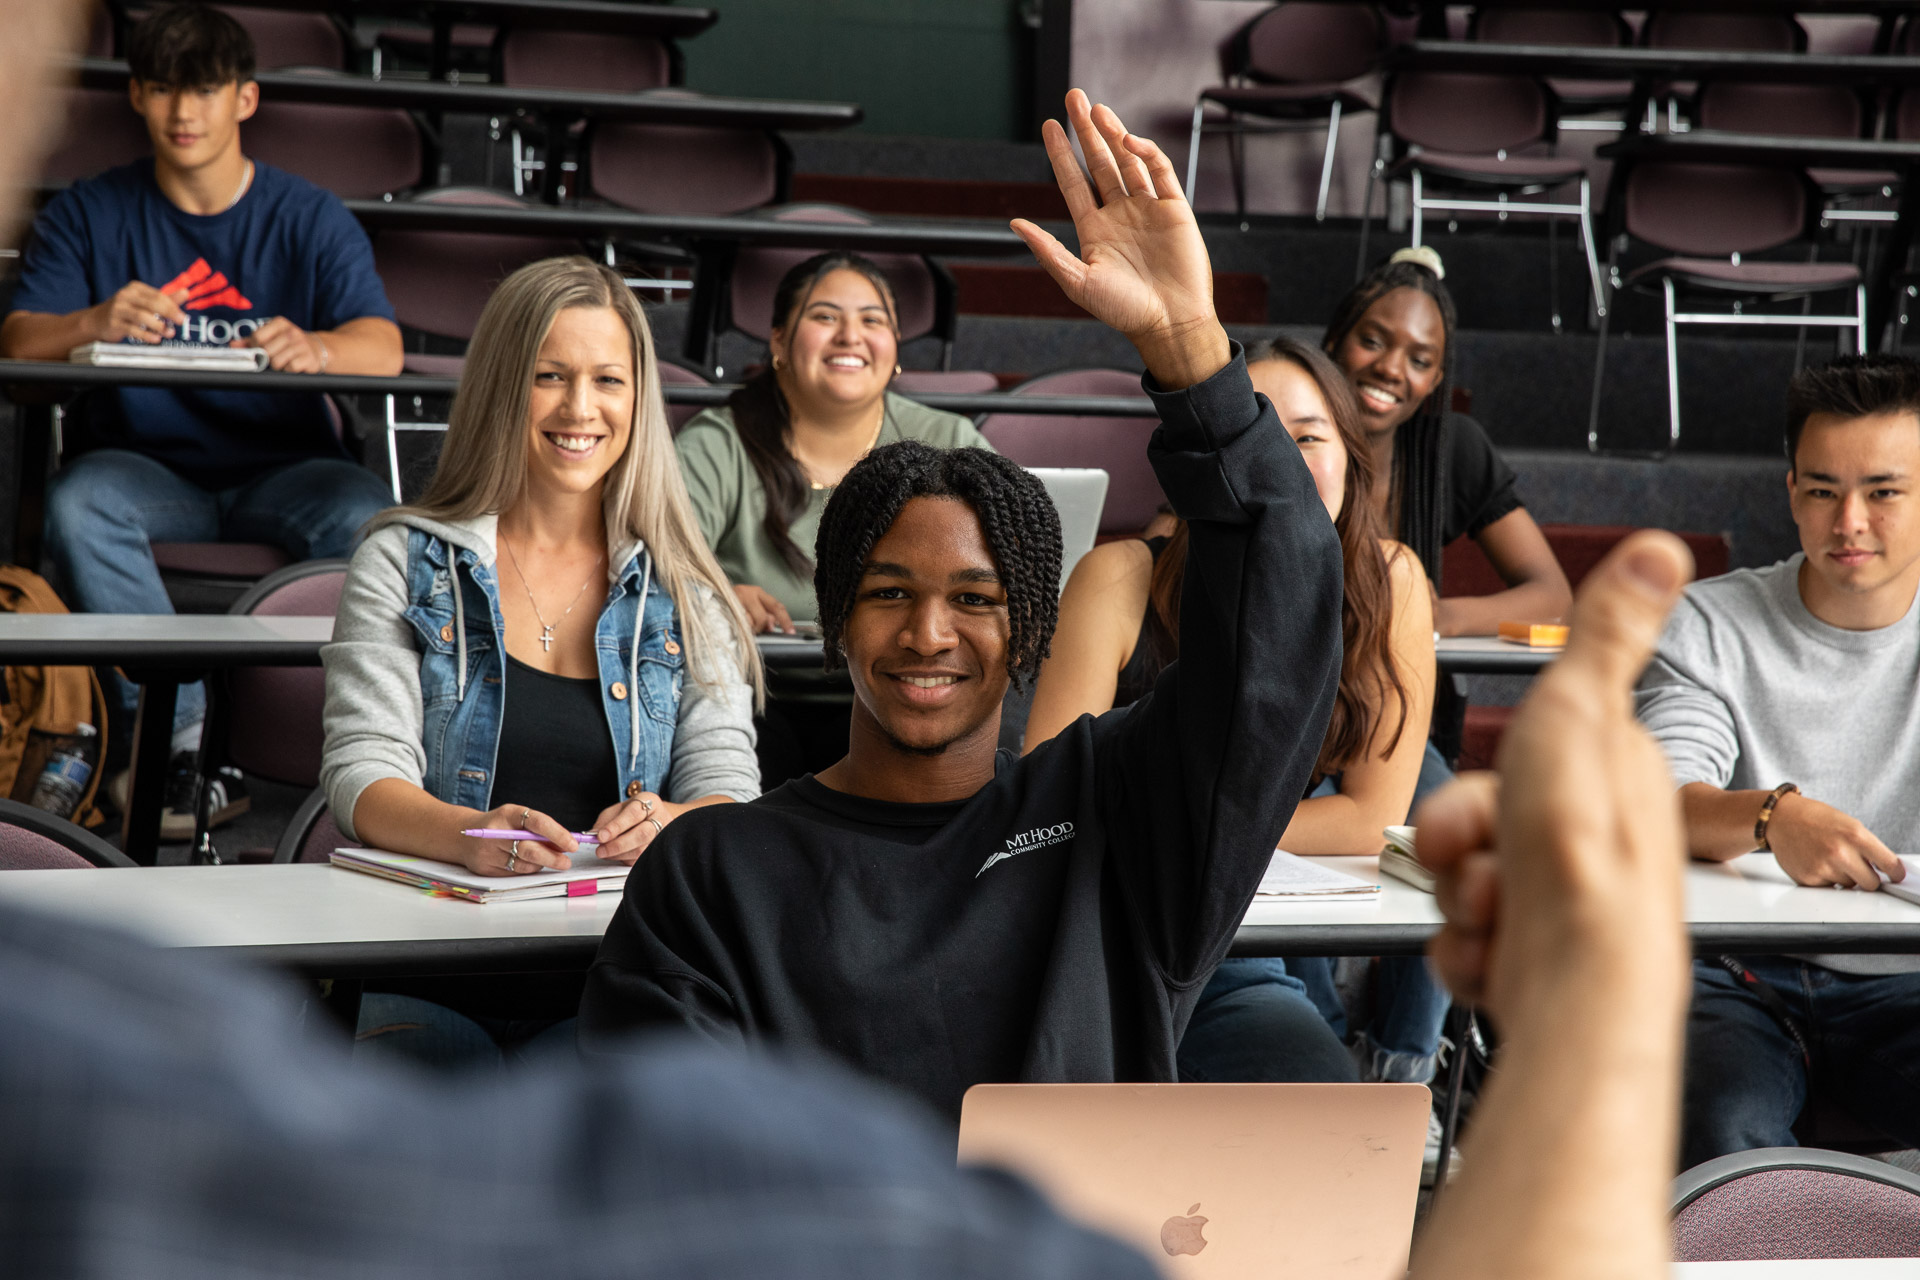 Student in class raising their hand.